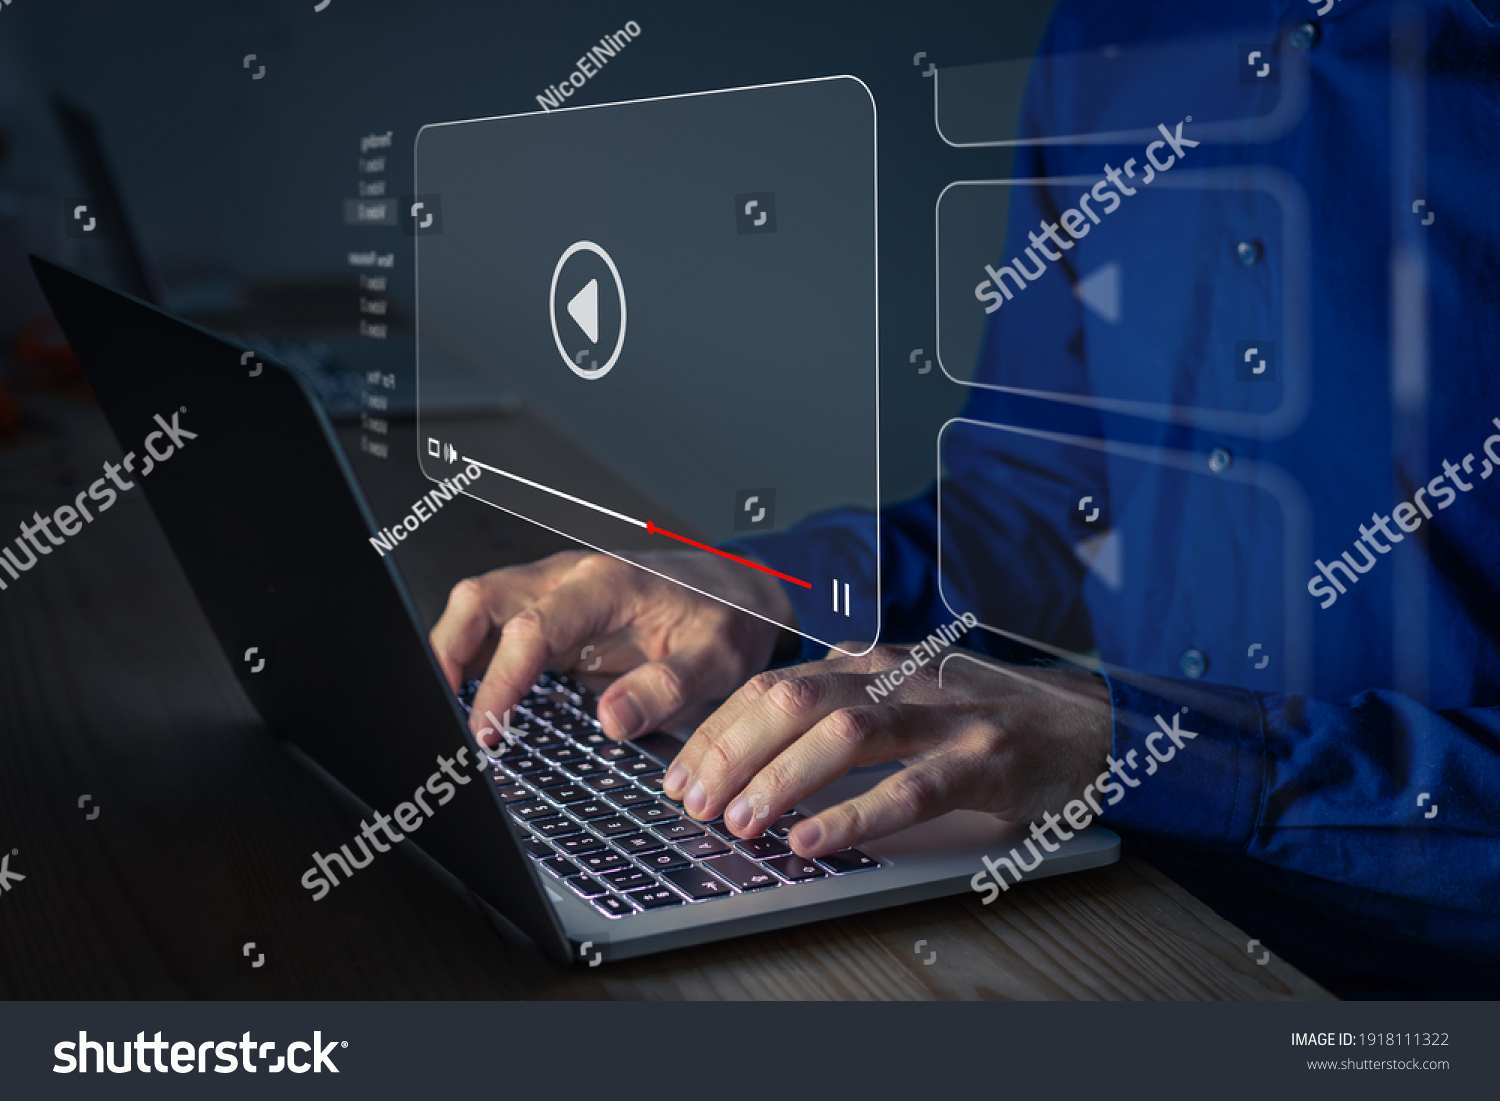 Video streaming on internet. Person watching online movie or TV series on laptop computer screen. Concept about subscription based live digital stream or channels, multimedia player with play button #1918111322